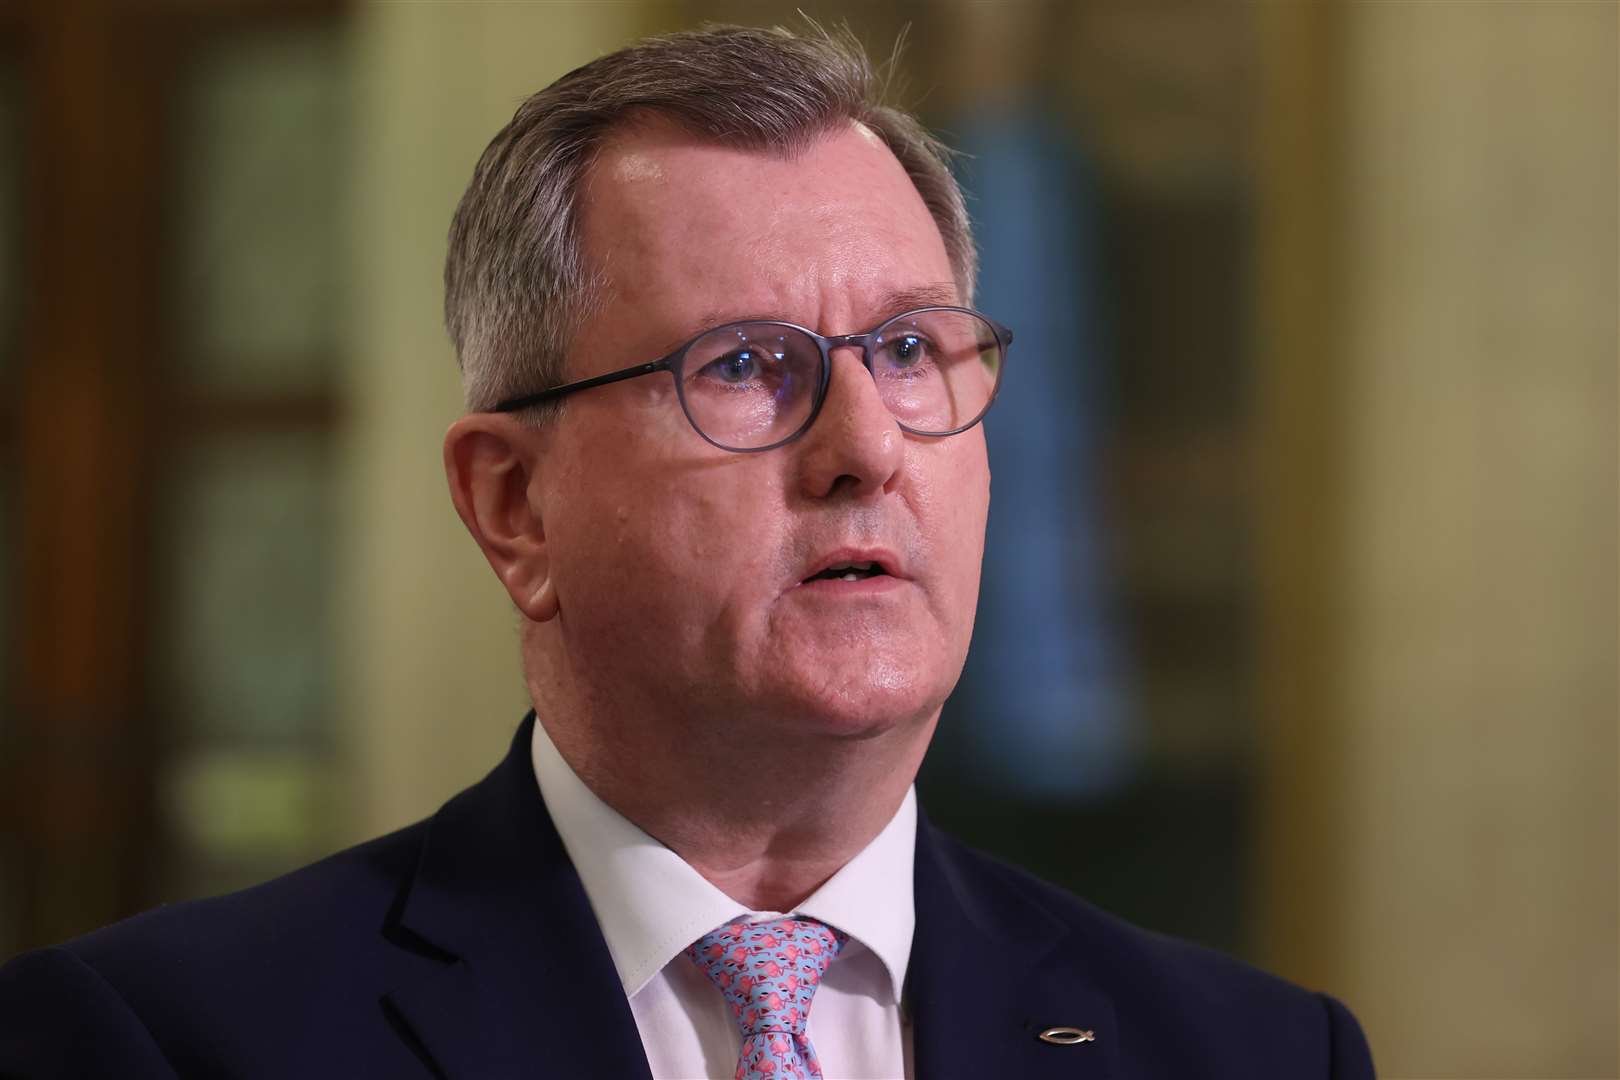 DUP leader Sir Jeffrey Donaldson has said his party will not return to powersharing until changes to the NI Protocol are delivered (PA)